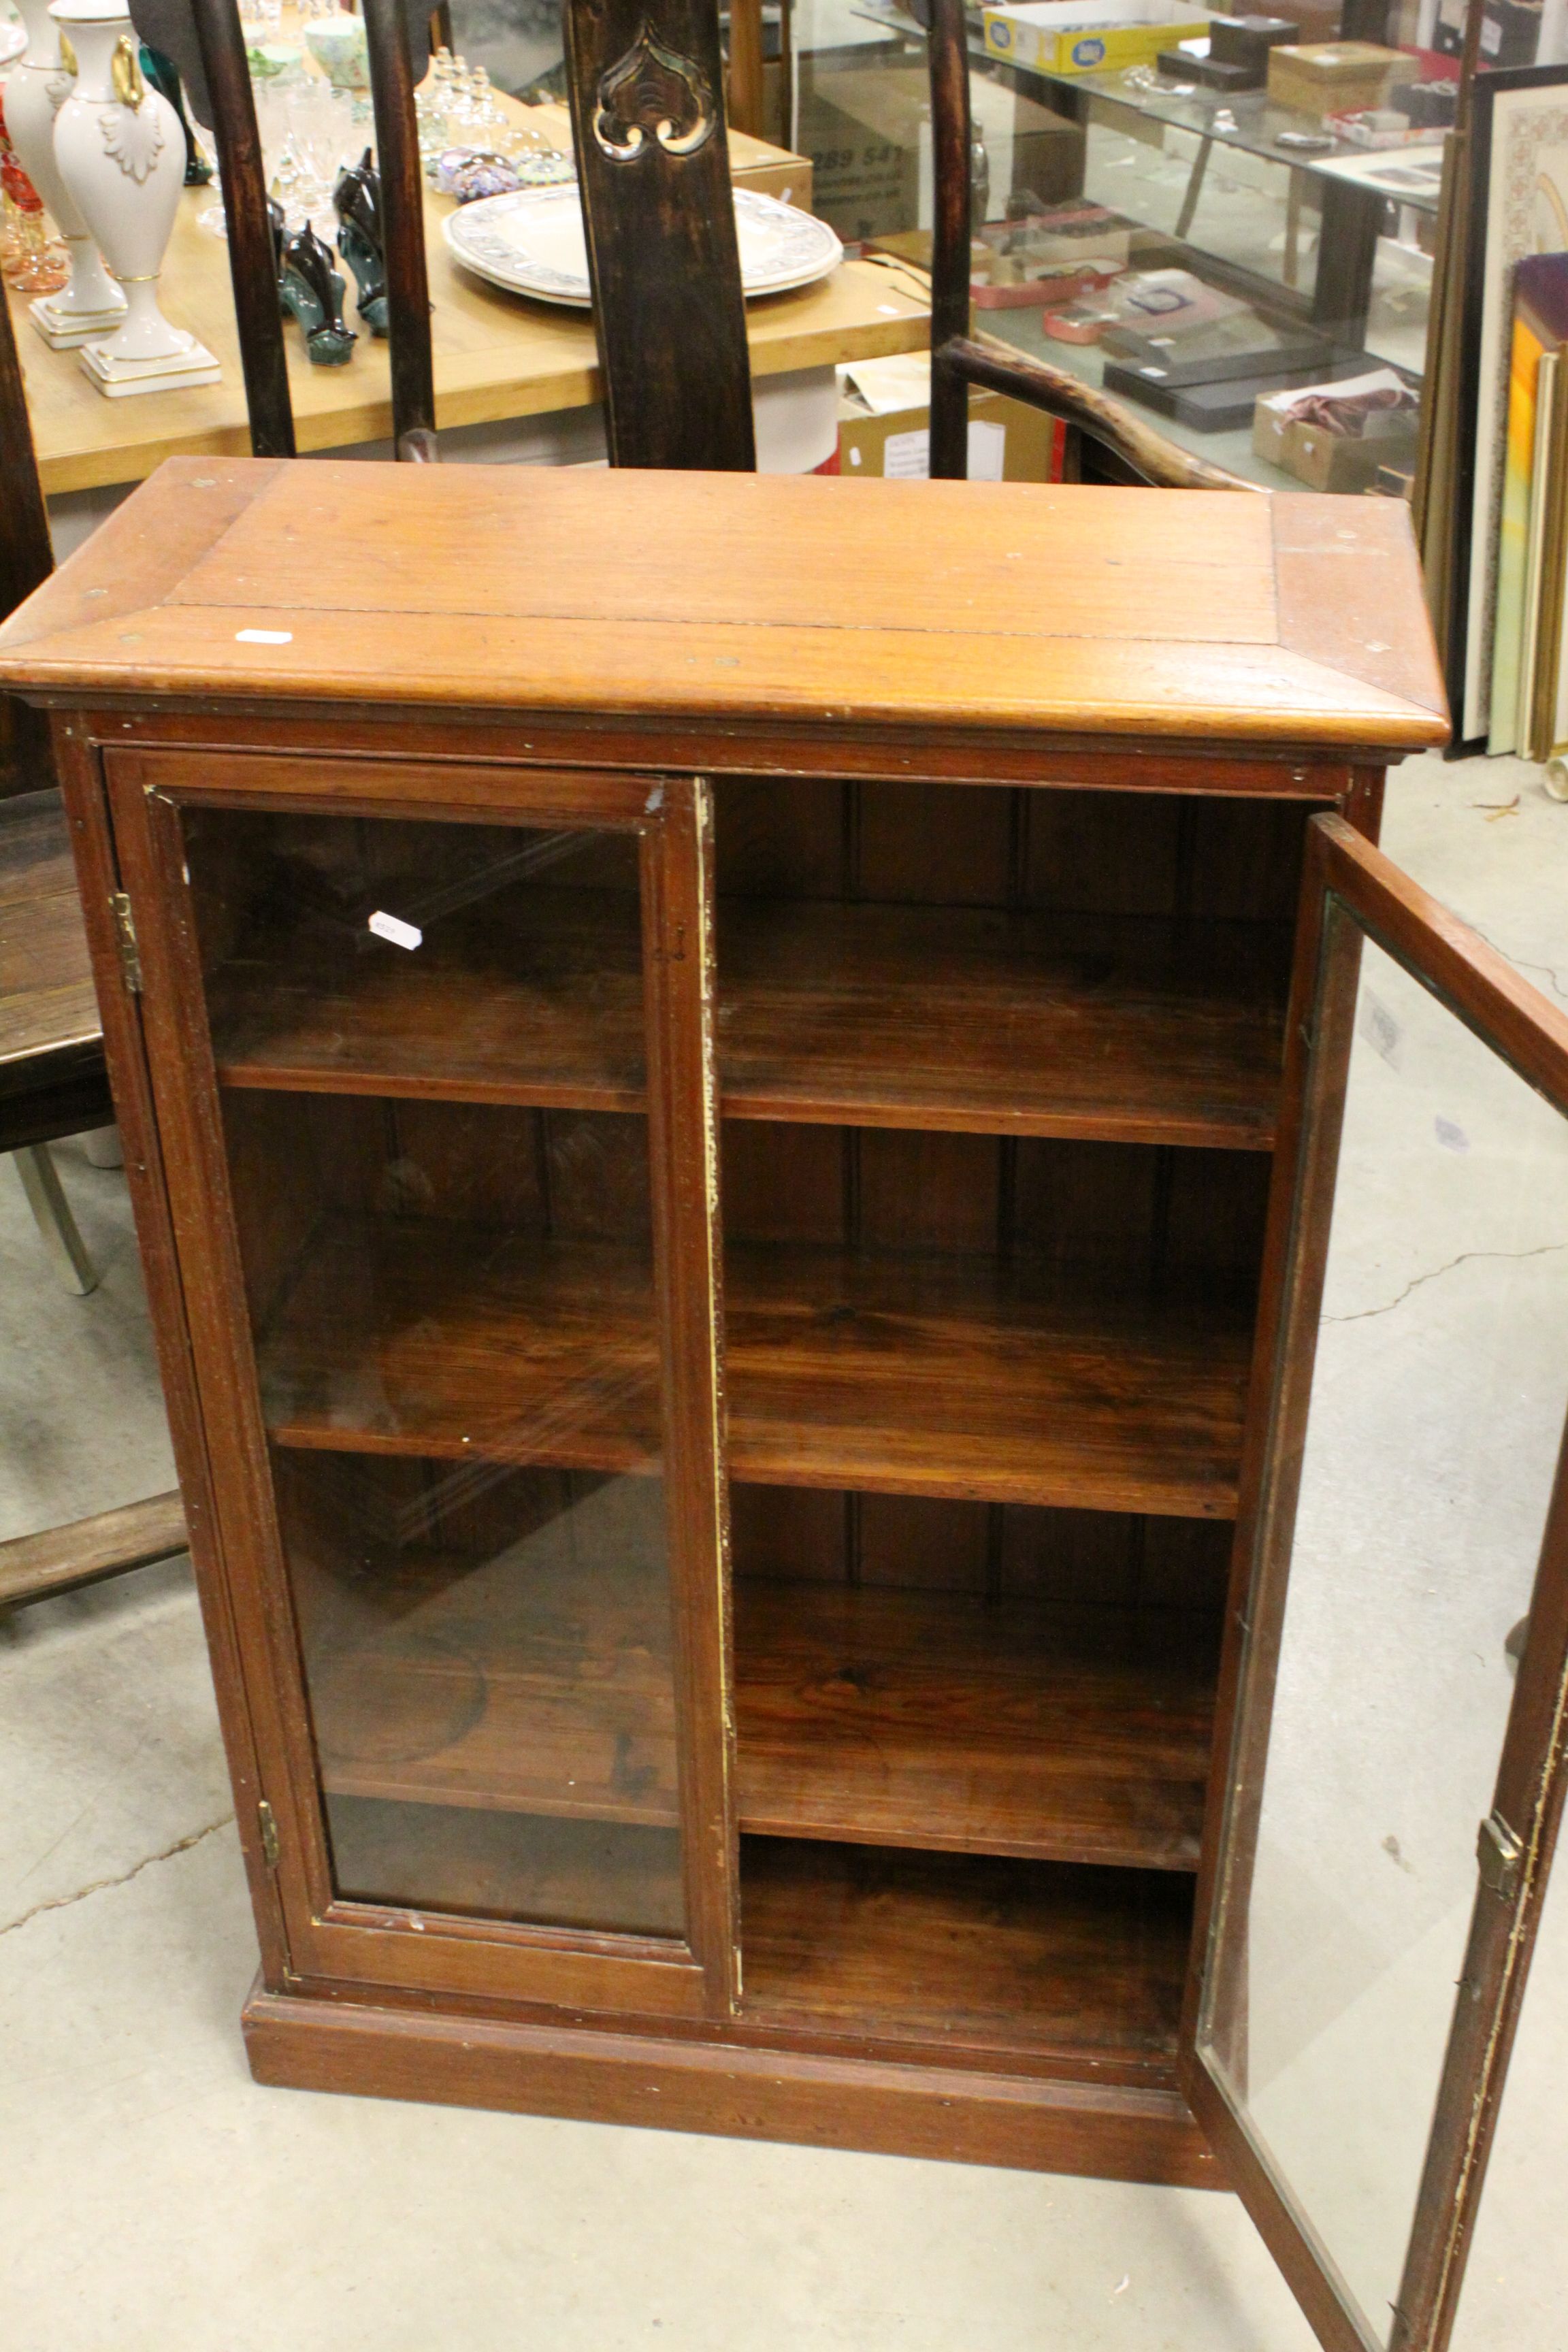 Small 19th century Mahogany Glazed Bookcase, 66cms wide x 99cms high - Image 4 of 5